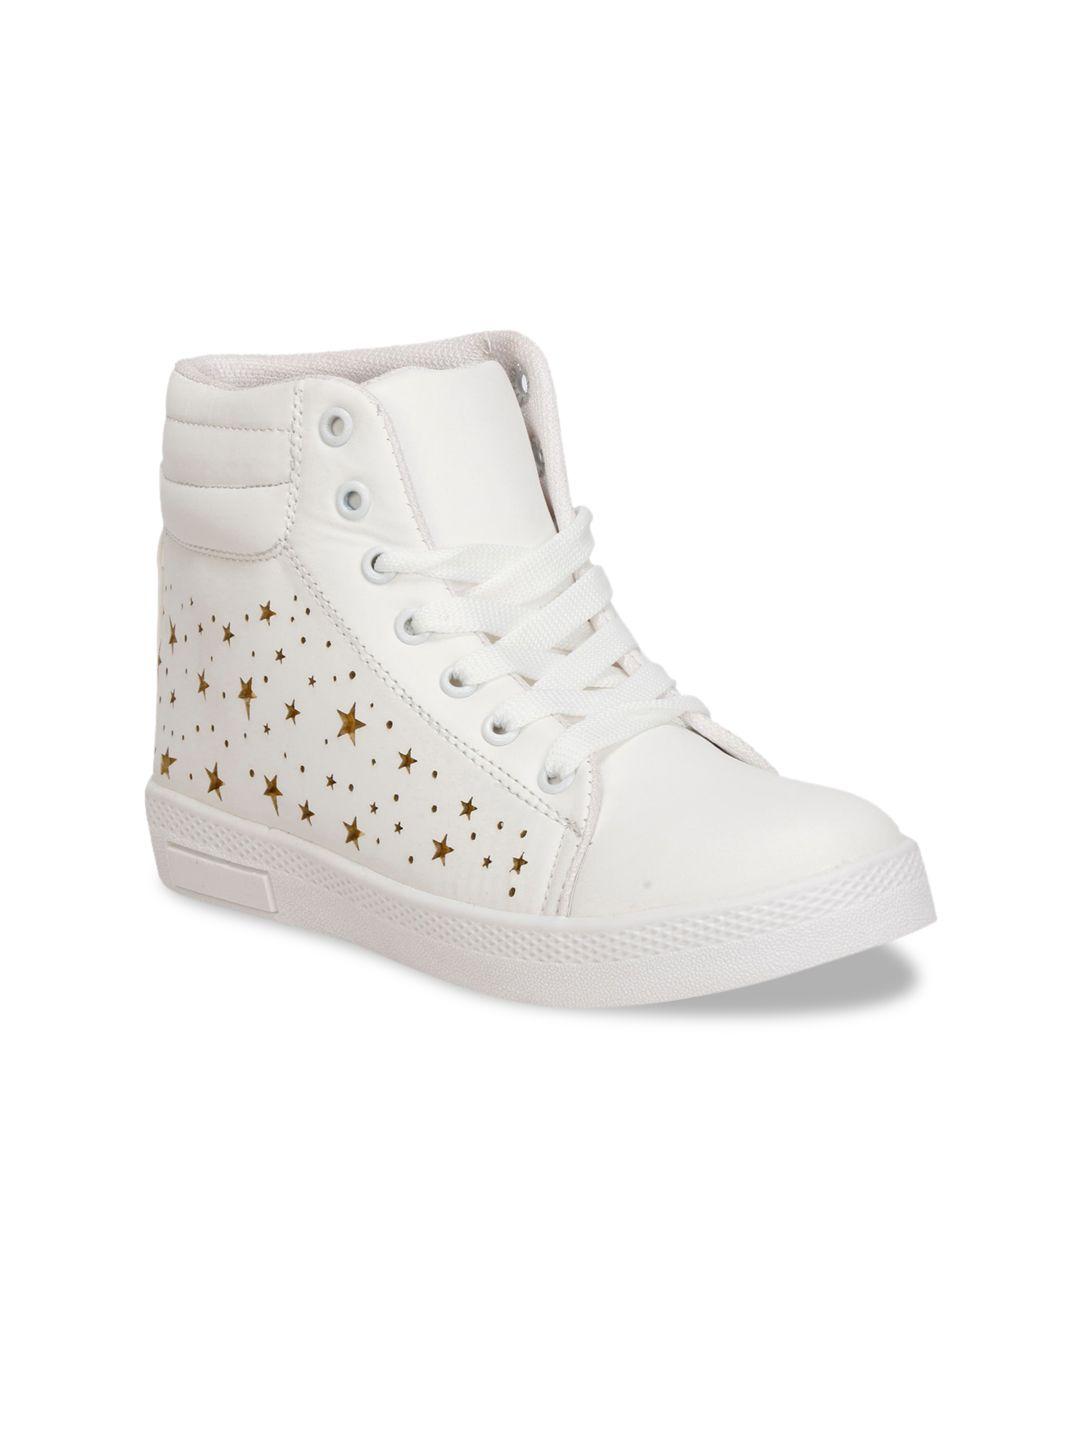 denill women white perforated high-top sneakers